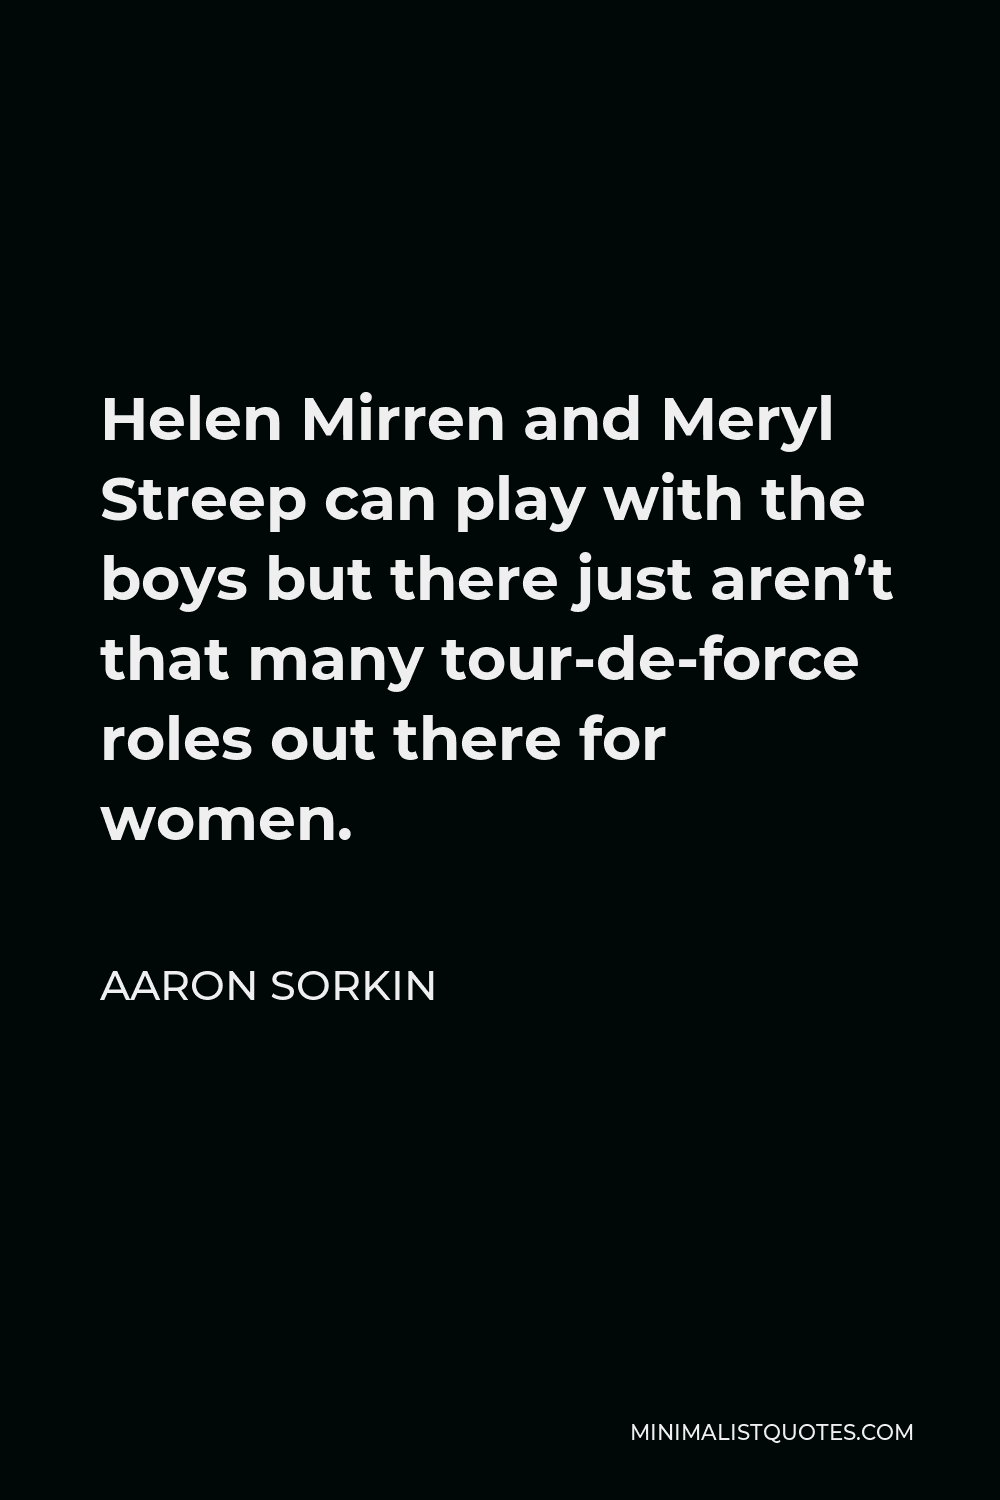 Aaron Sorkin Quote - Helen Mirren and Meryl Streep can play with the boys but there just aren’t that many tour-de-force roles out there for women.